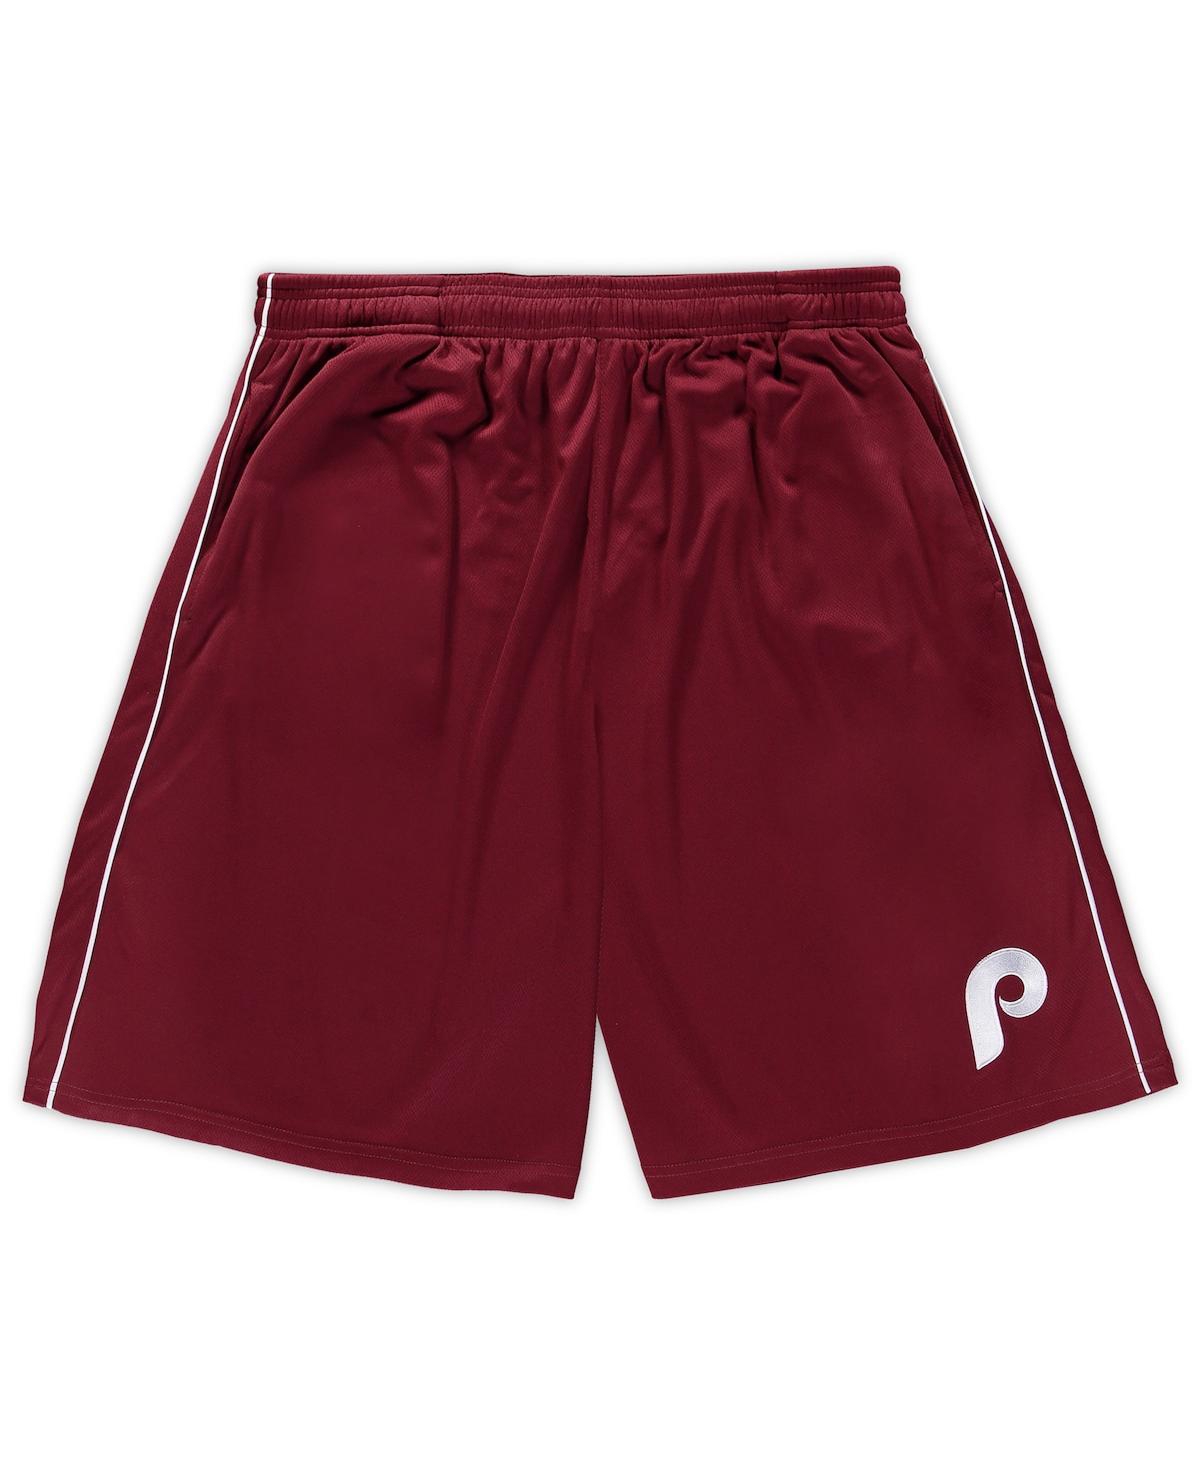 Men's Burgundy Philadelphia Phillies Big and Tall Cooperstown Collection Mesh Shorts - Burgundy